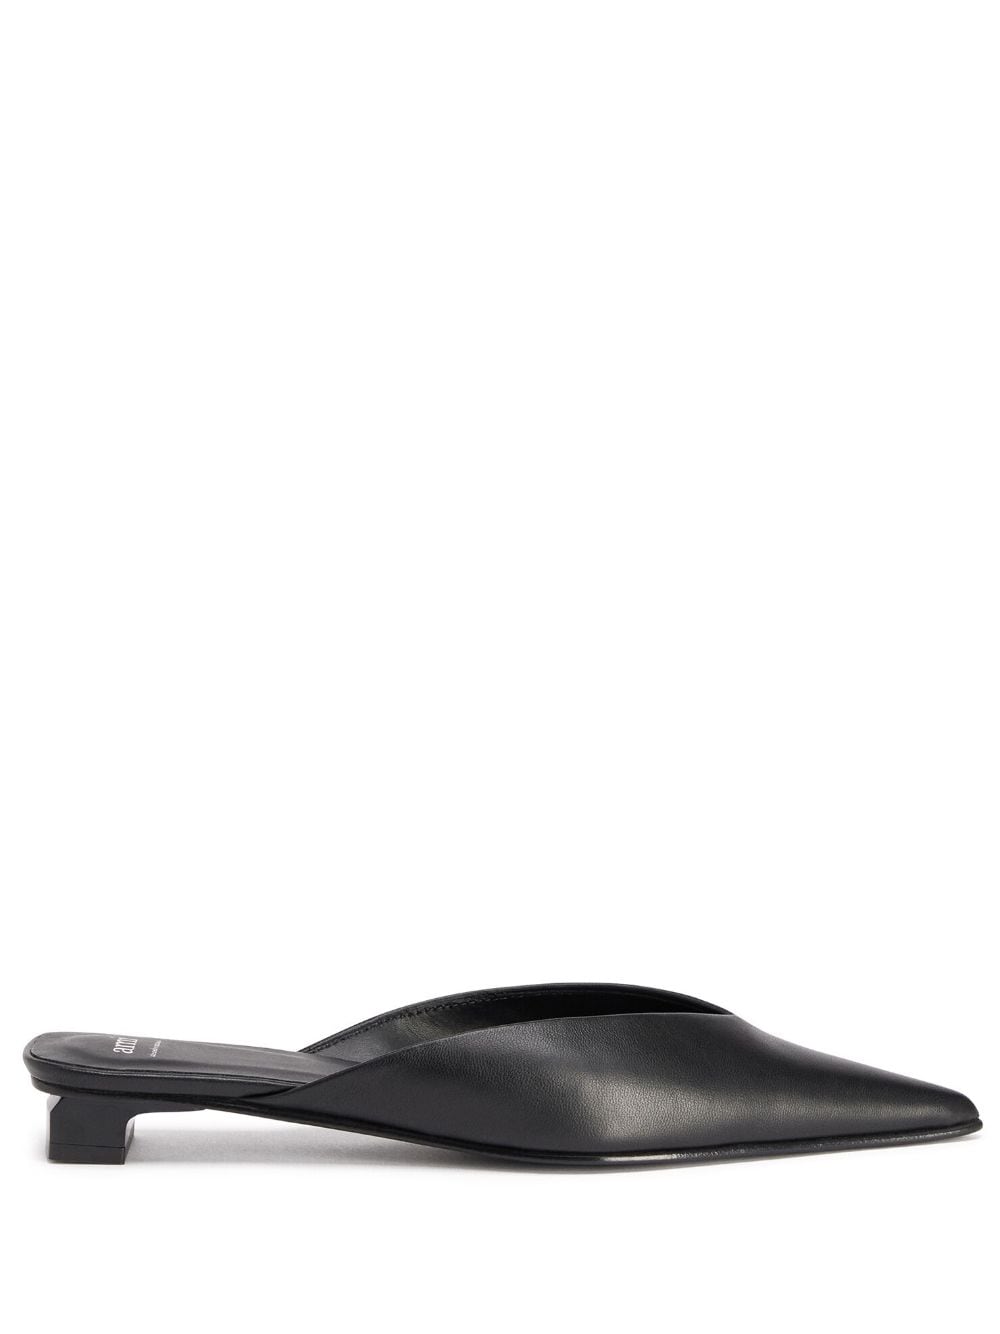 AMI ALEXANDRE MATTIUSSI POINTED LEATHER MULES